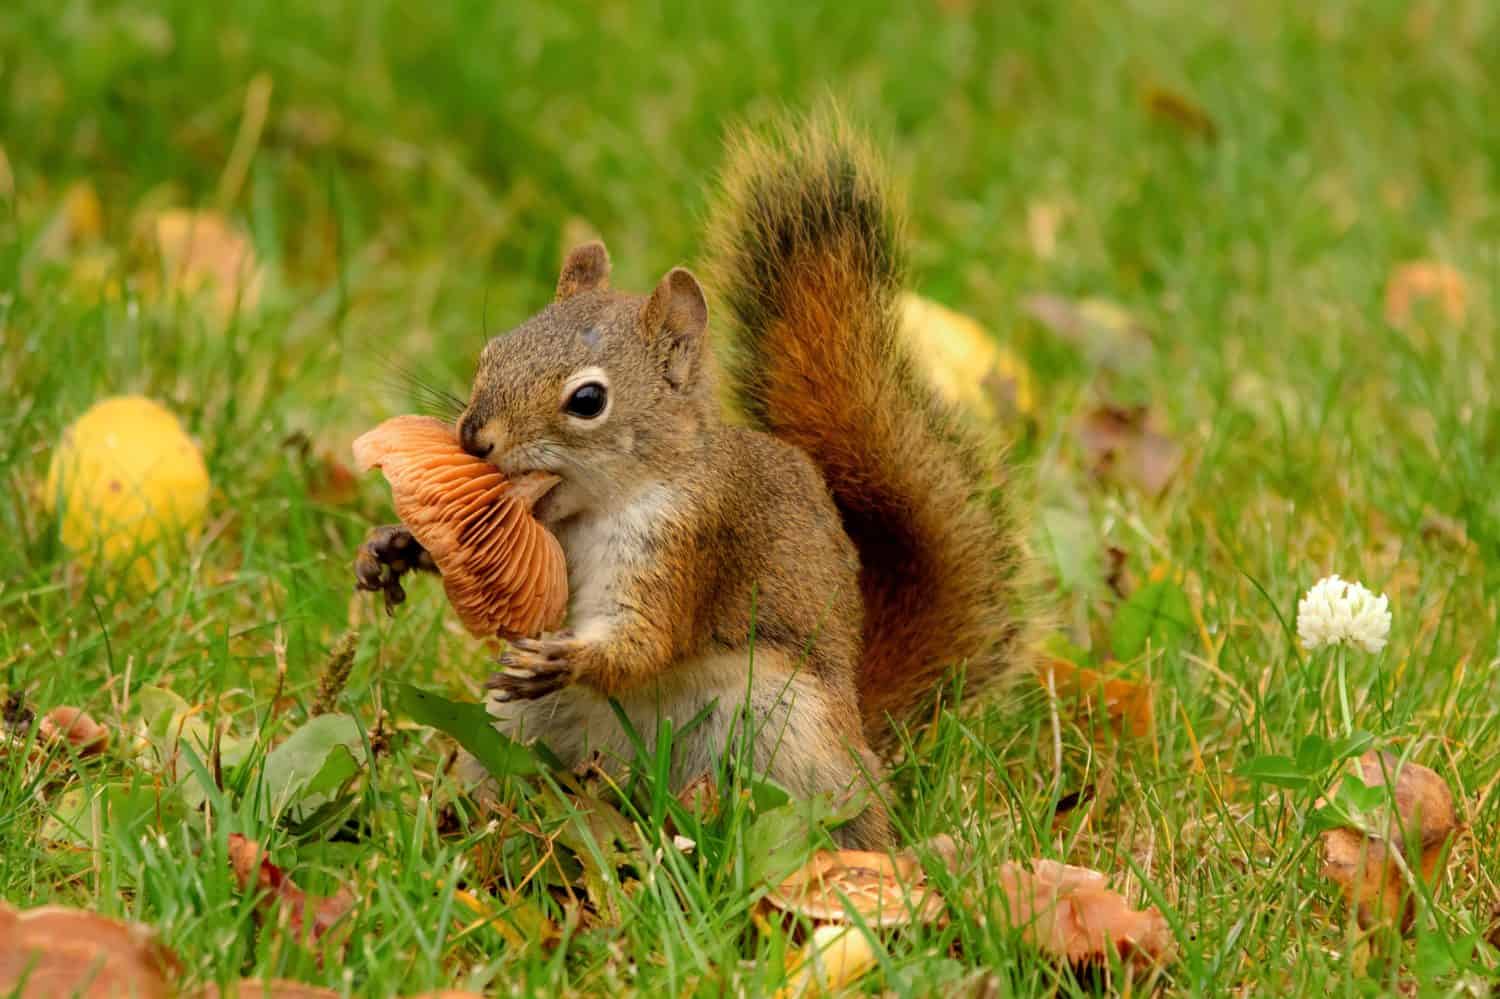 American red squirrel is eating an orange mushroom on the green lawn yard with yellow fallen leaves in autumn.